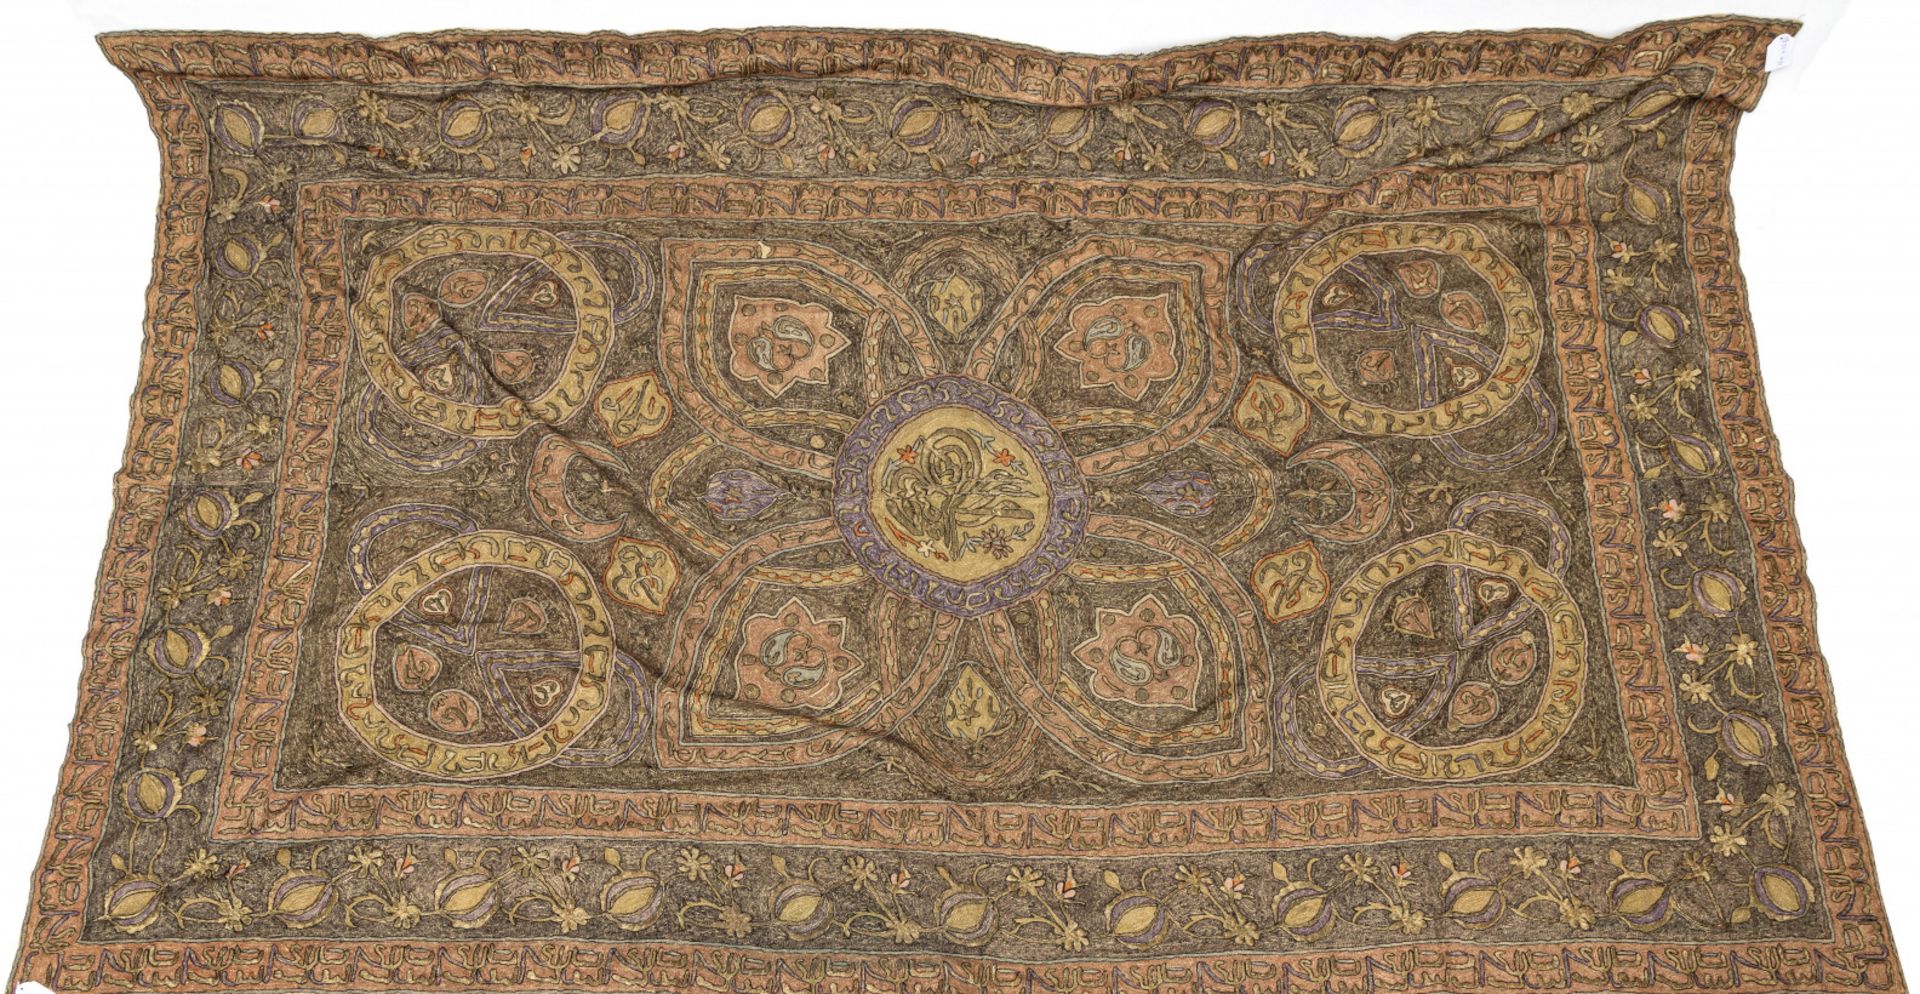 Large Ottoman embroidered textile panel, ca. 1900,